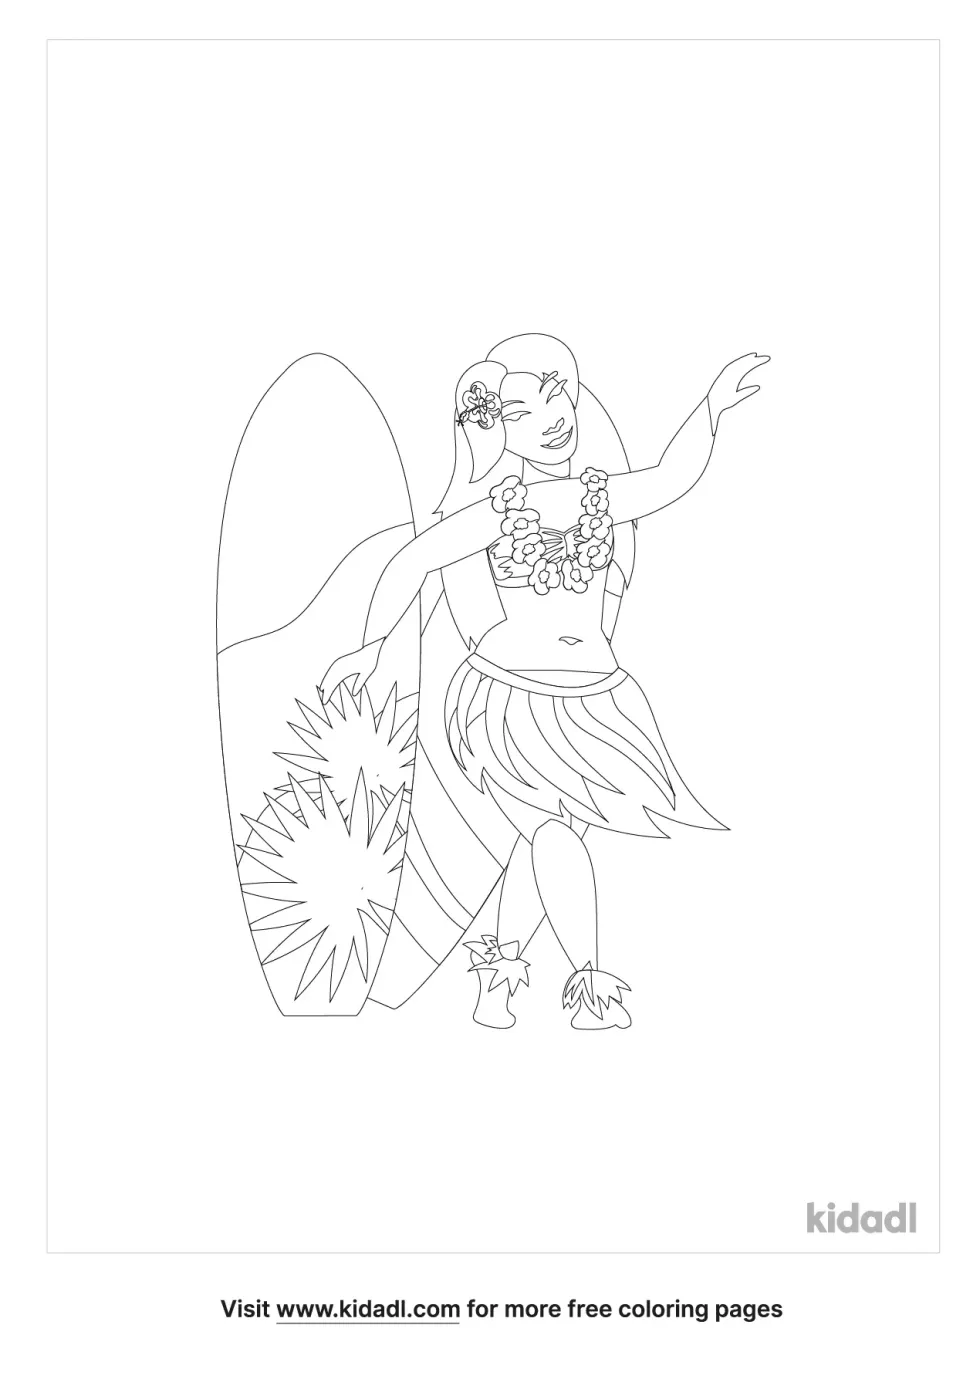 Luau Coloring Page